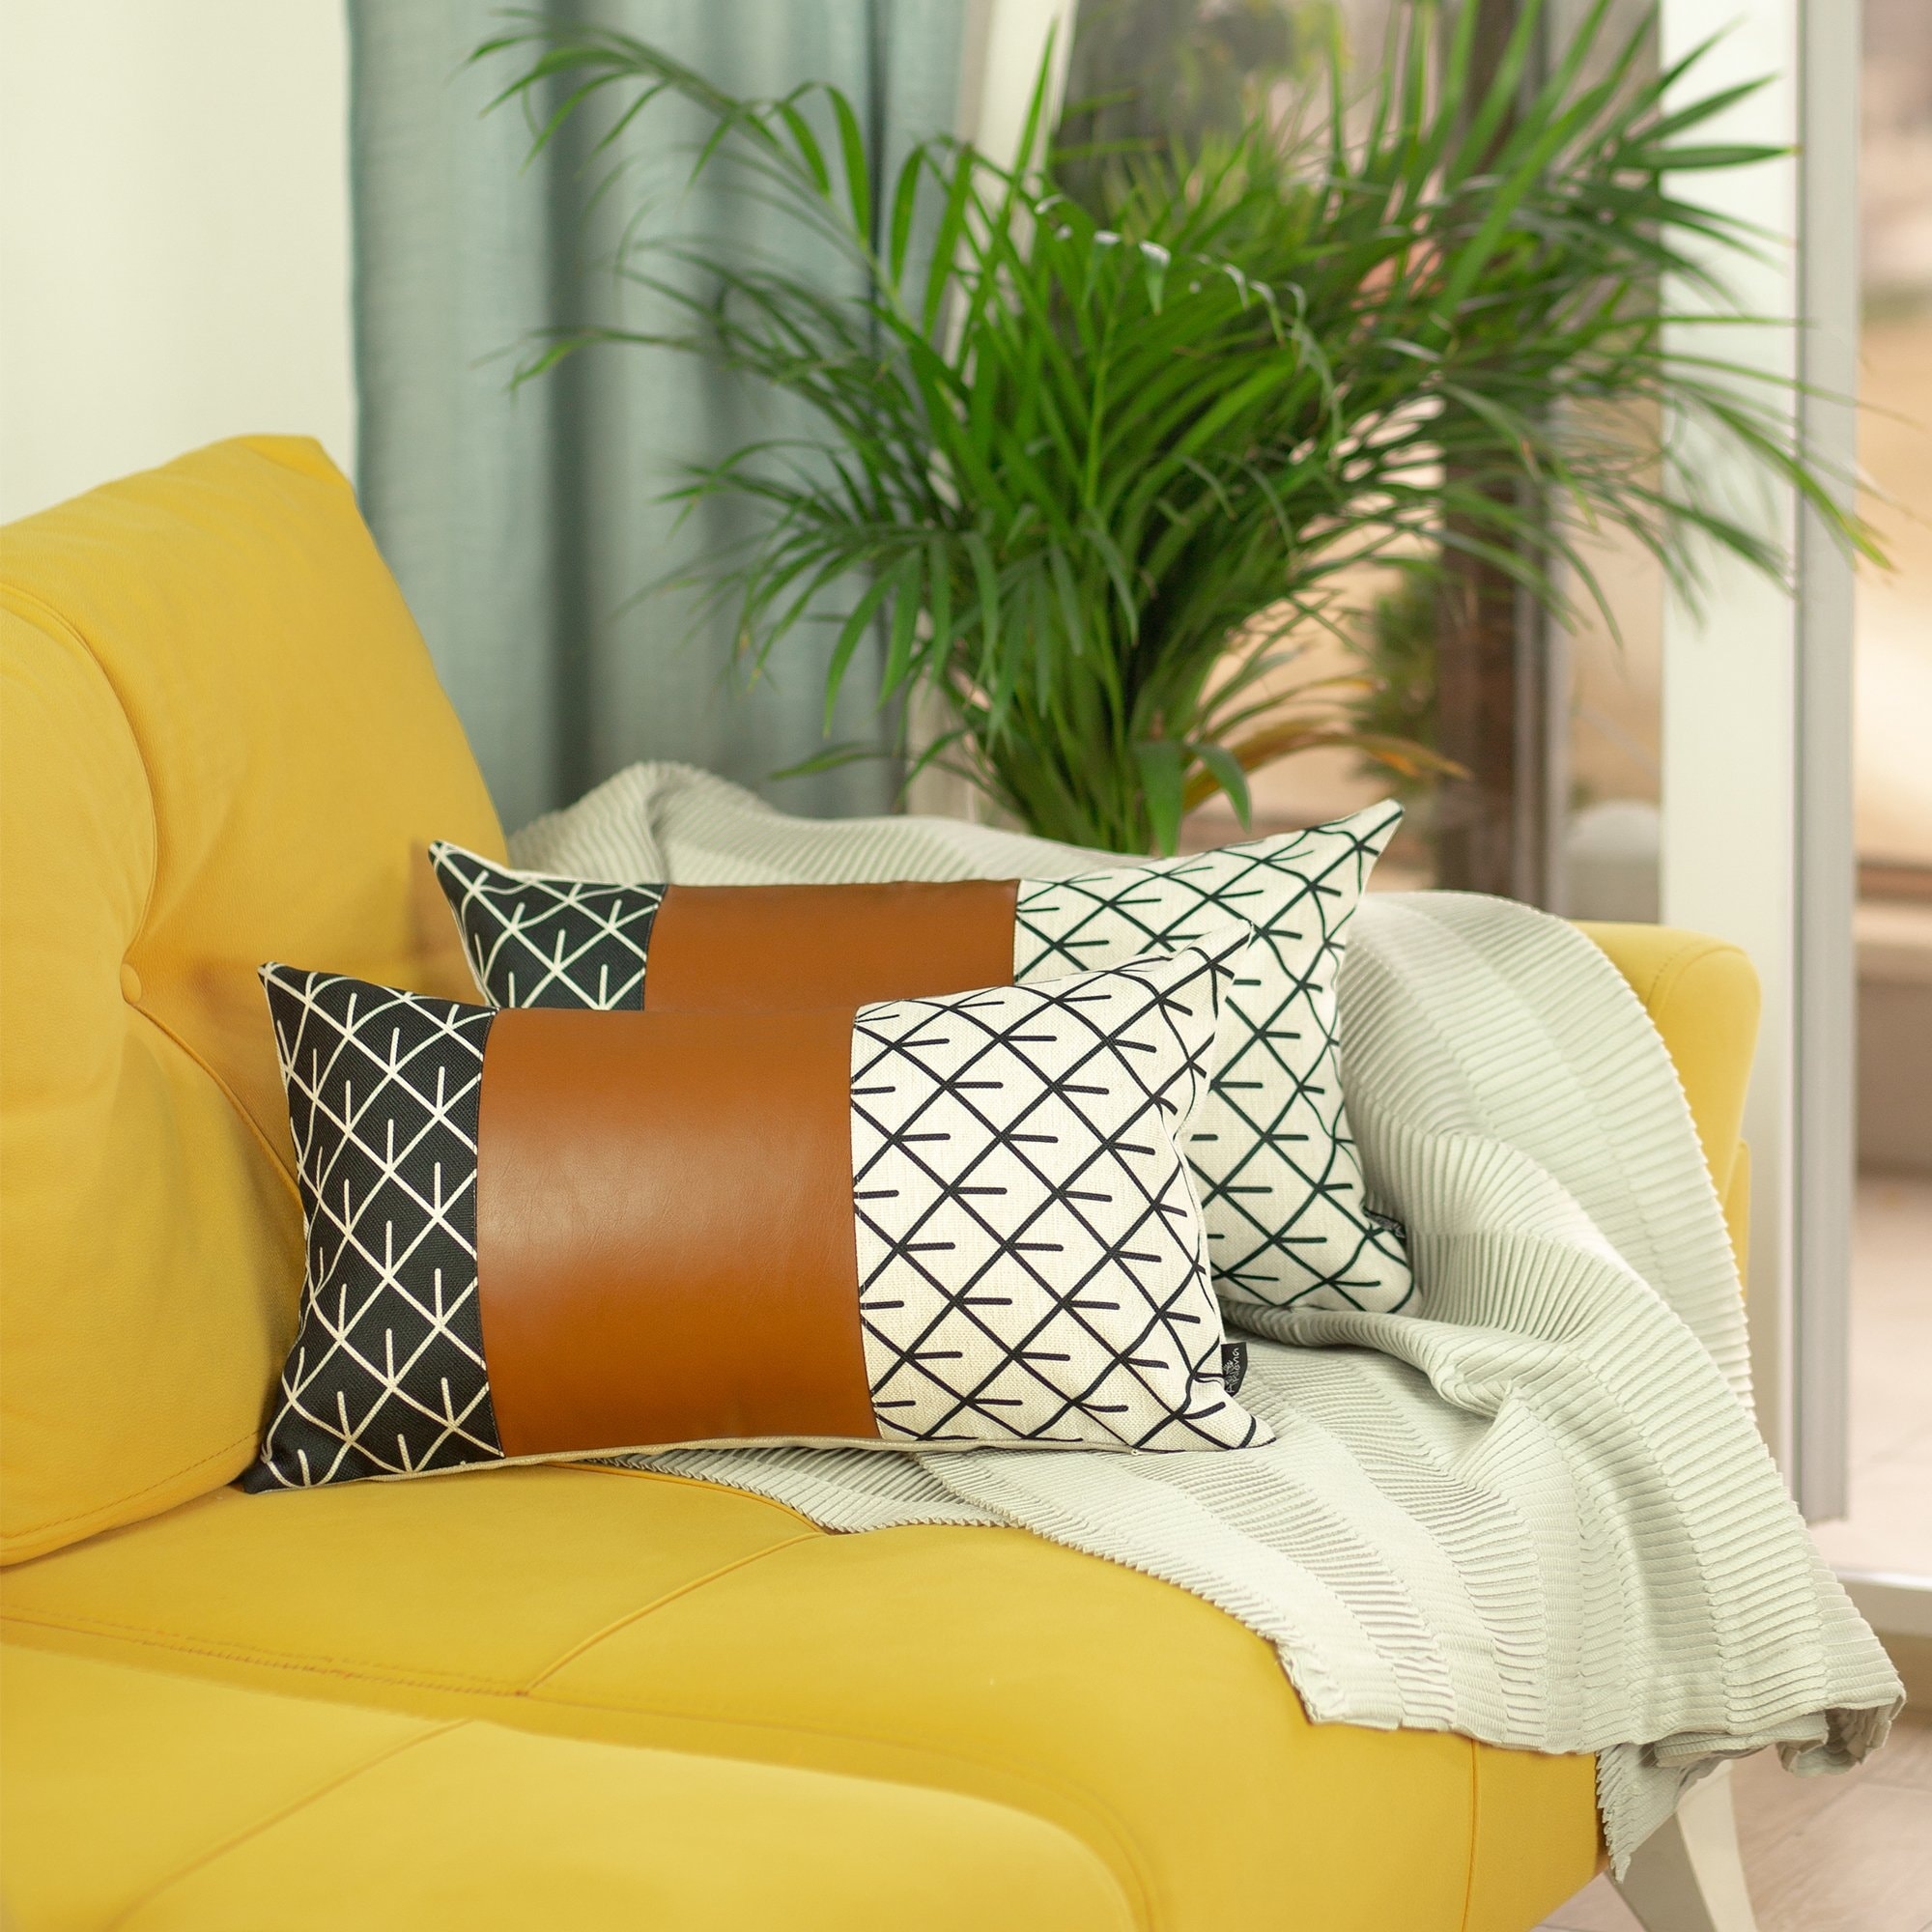 https://ak1.ostkcdn.com/images/products/is/images/direct/853c9387b914d844595ca9d7e9503cfcc57980ef/Decorative-Set-of-2-Vegan-Faux-Leather-Throw-Pillow-Cover-%26-Inserts.jpg